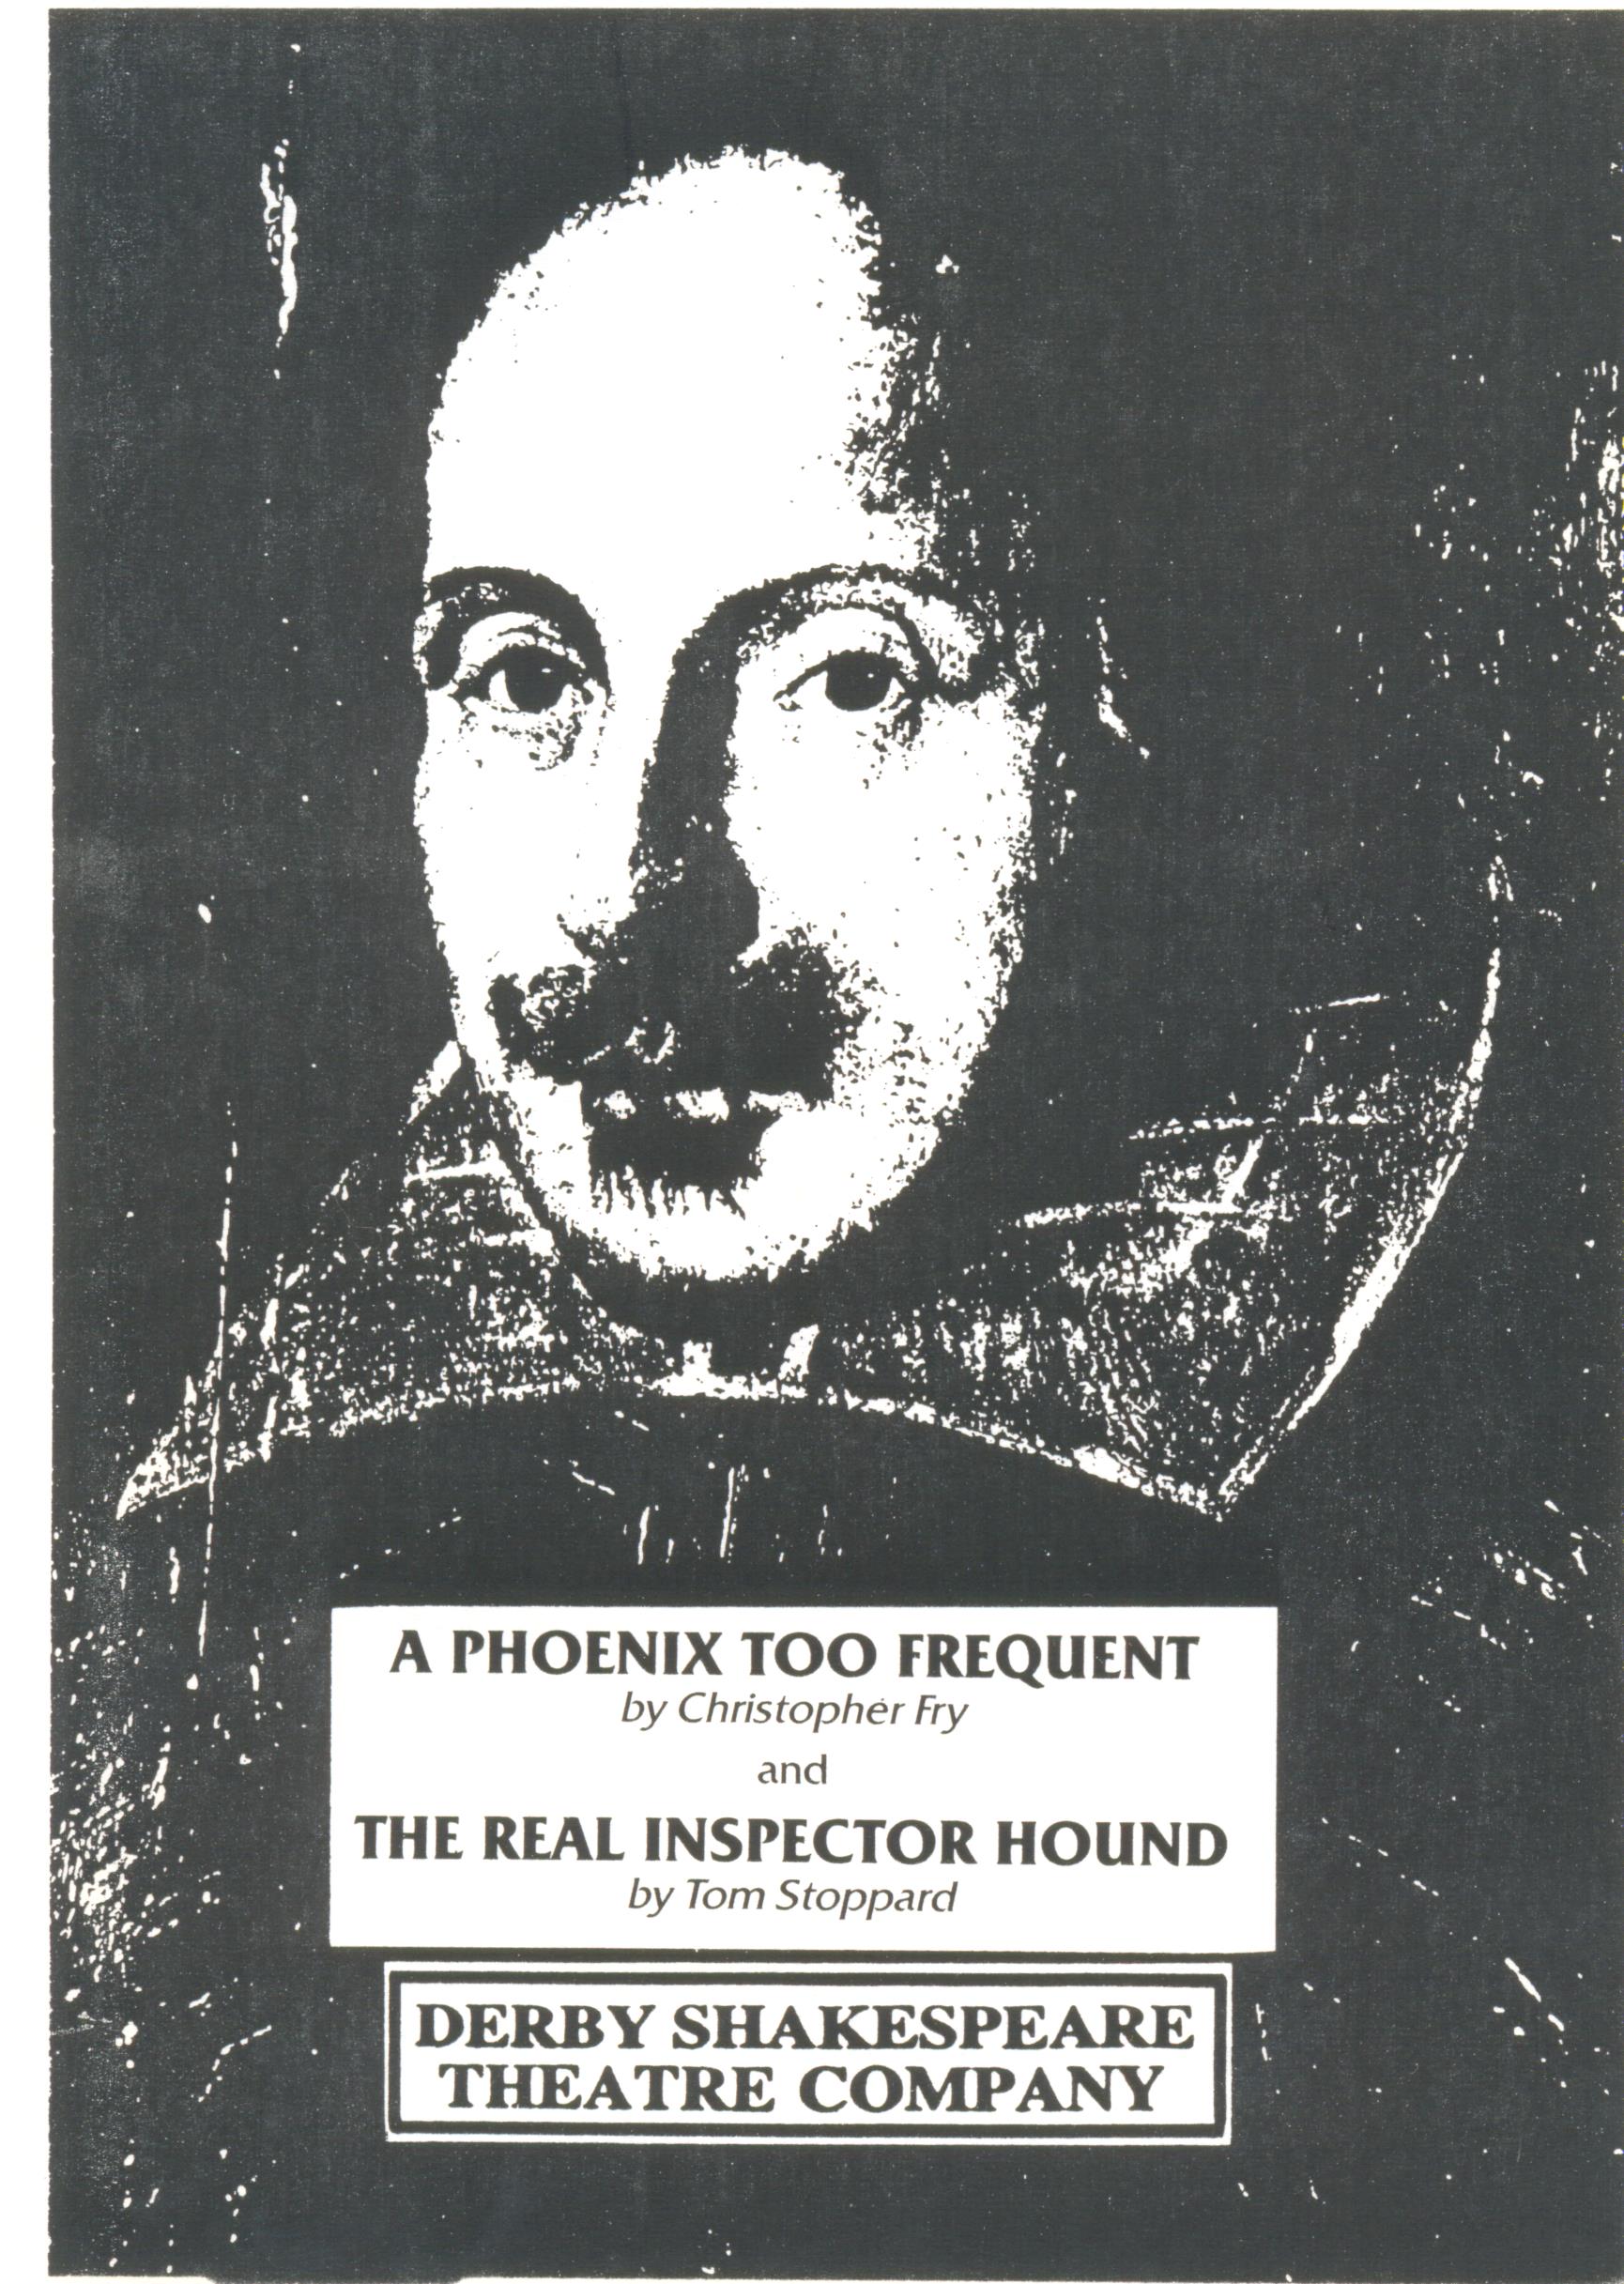 'A Phoenix Too Frequent' & 'The Real Inspector Hound' 1987